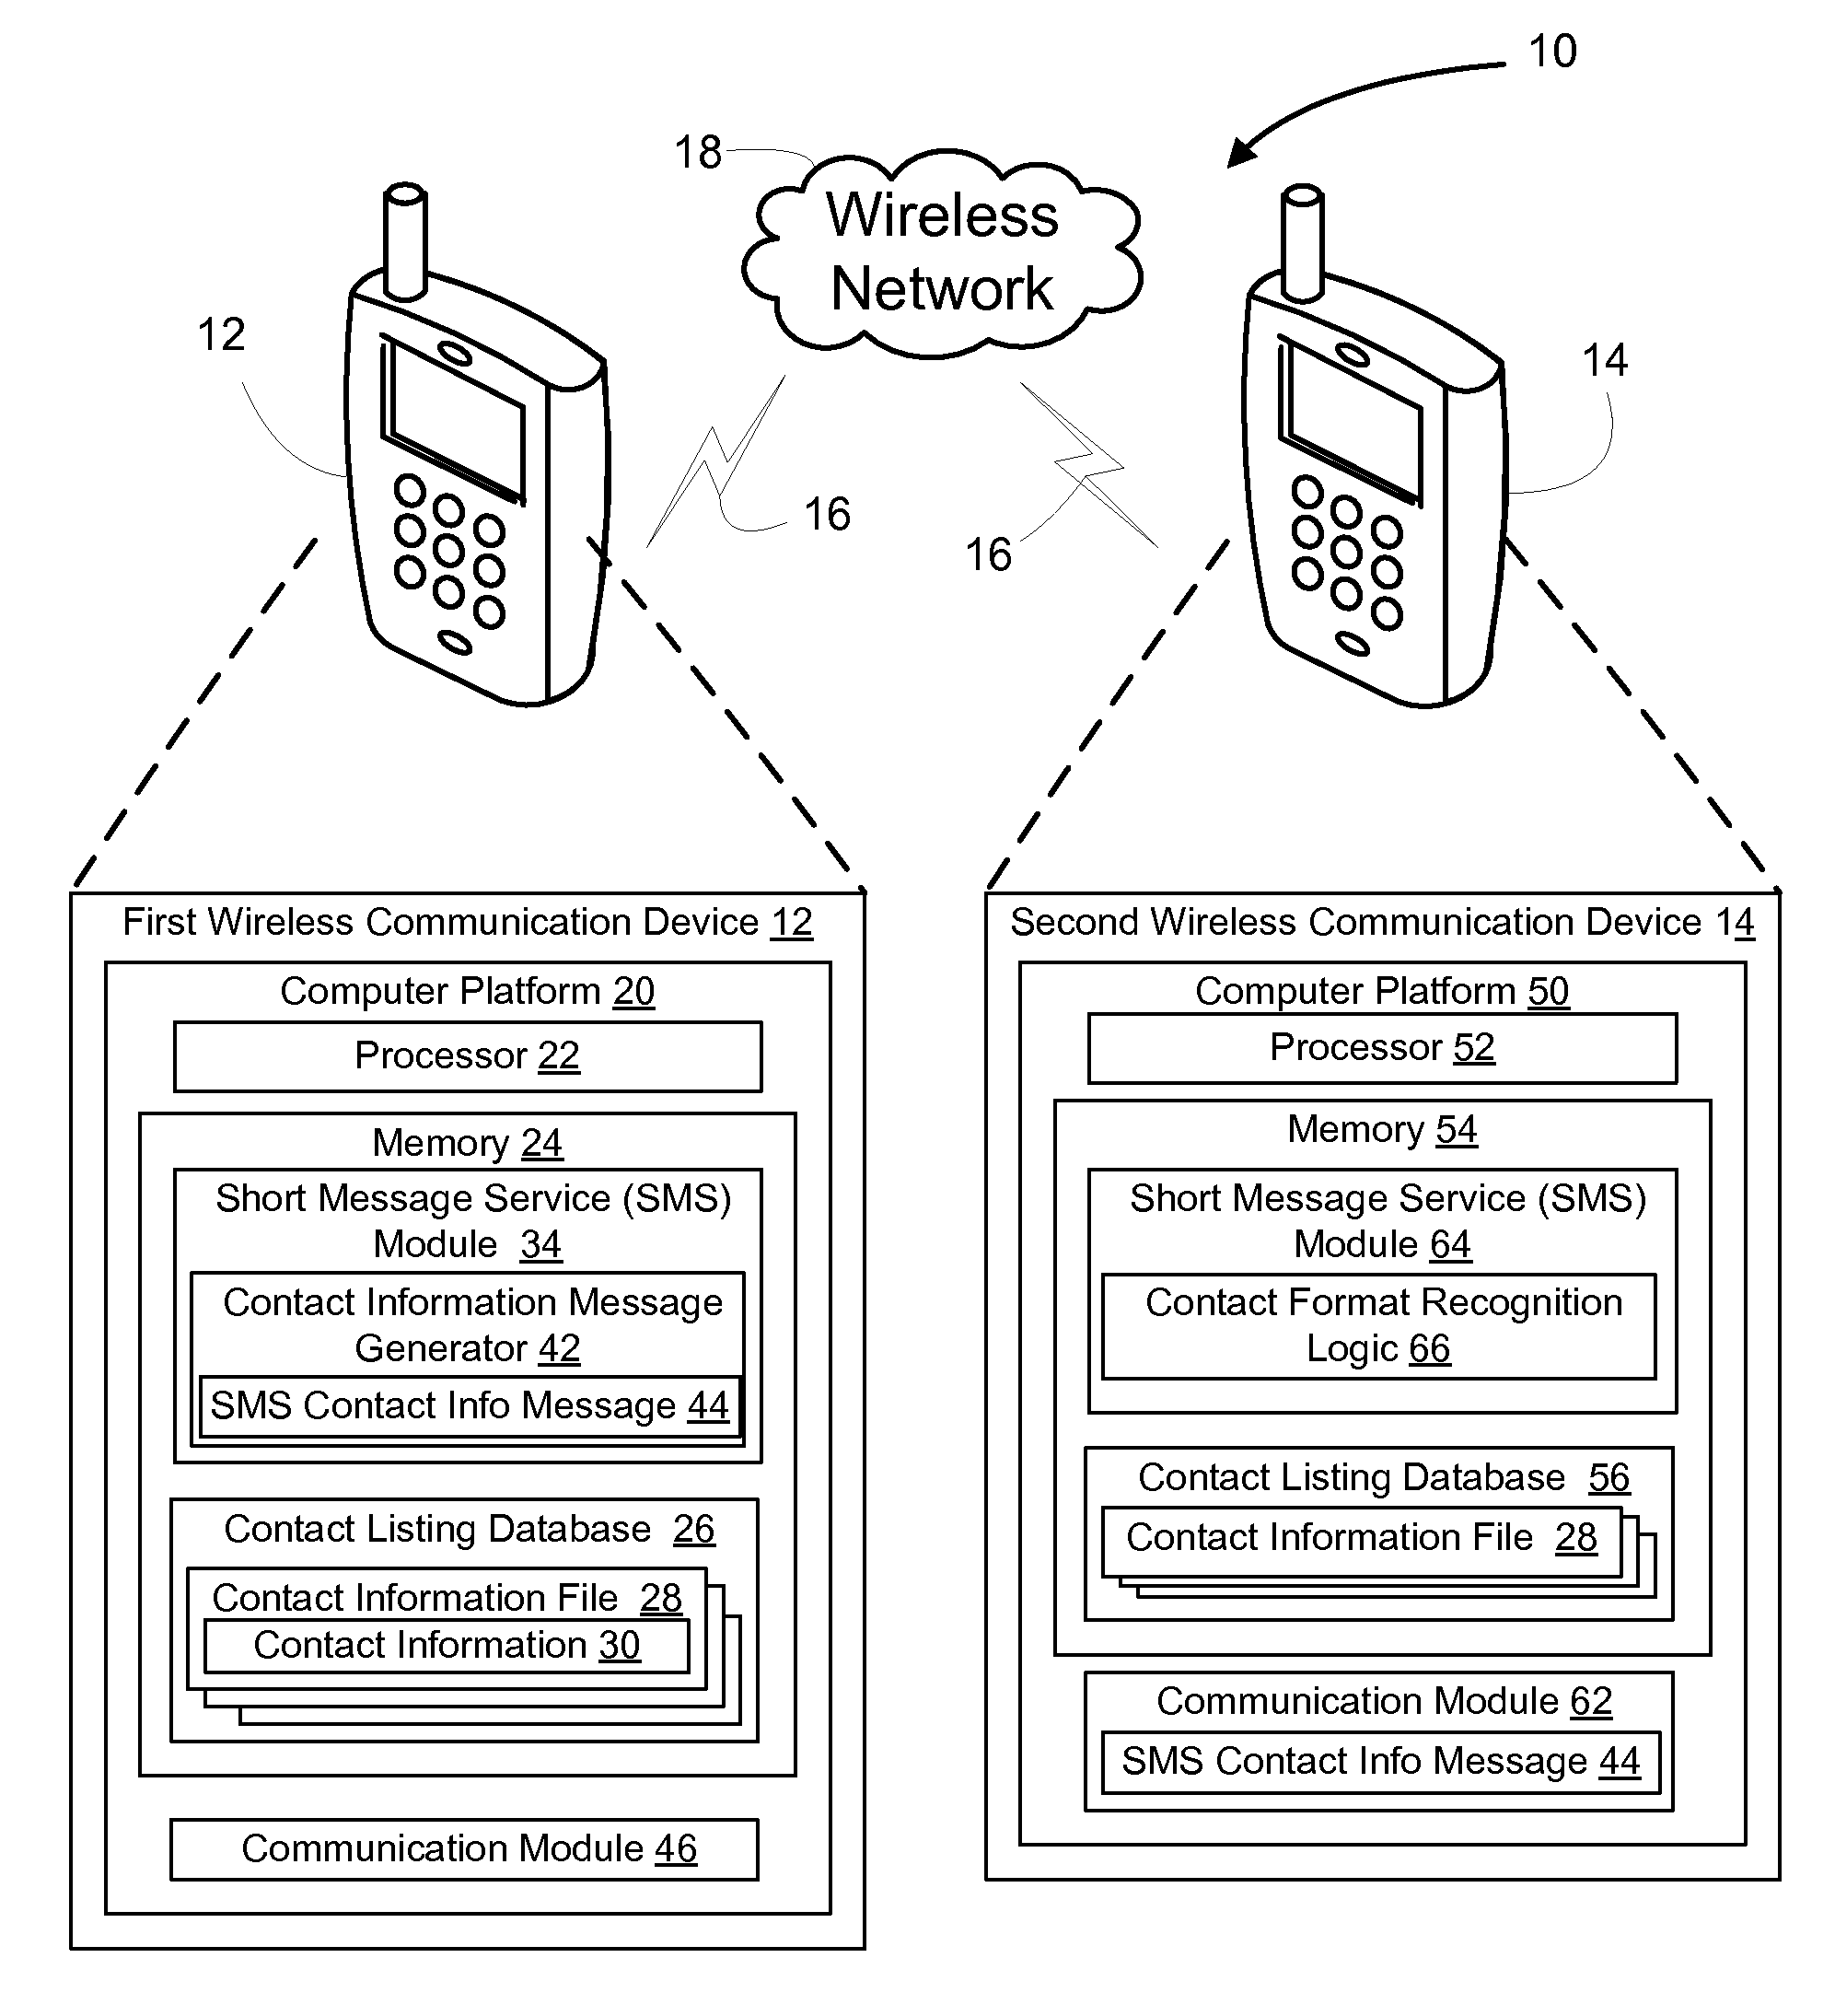 Apparatus and methods of sharing contact information between mobile communication devices using short message service